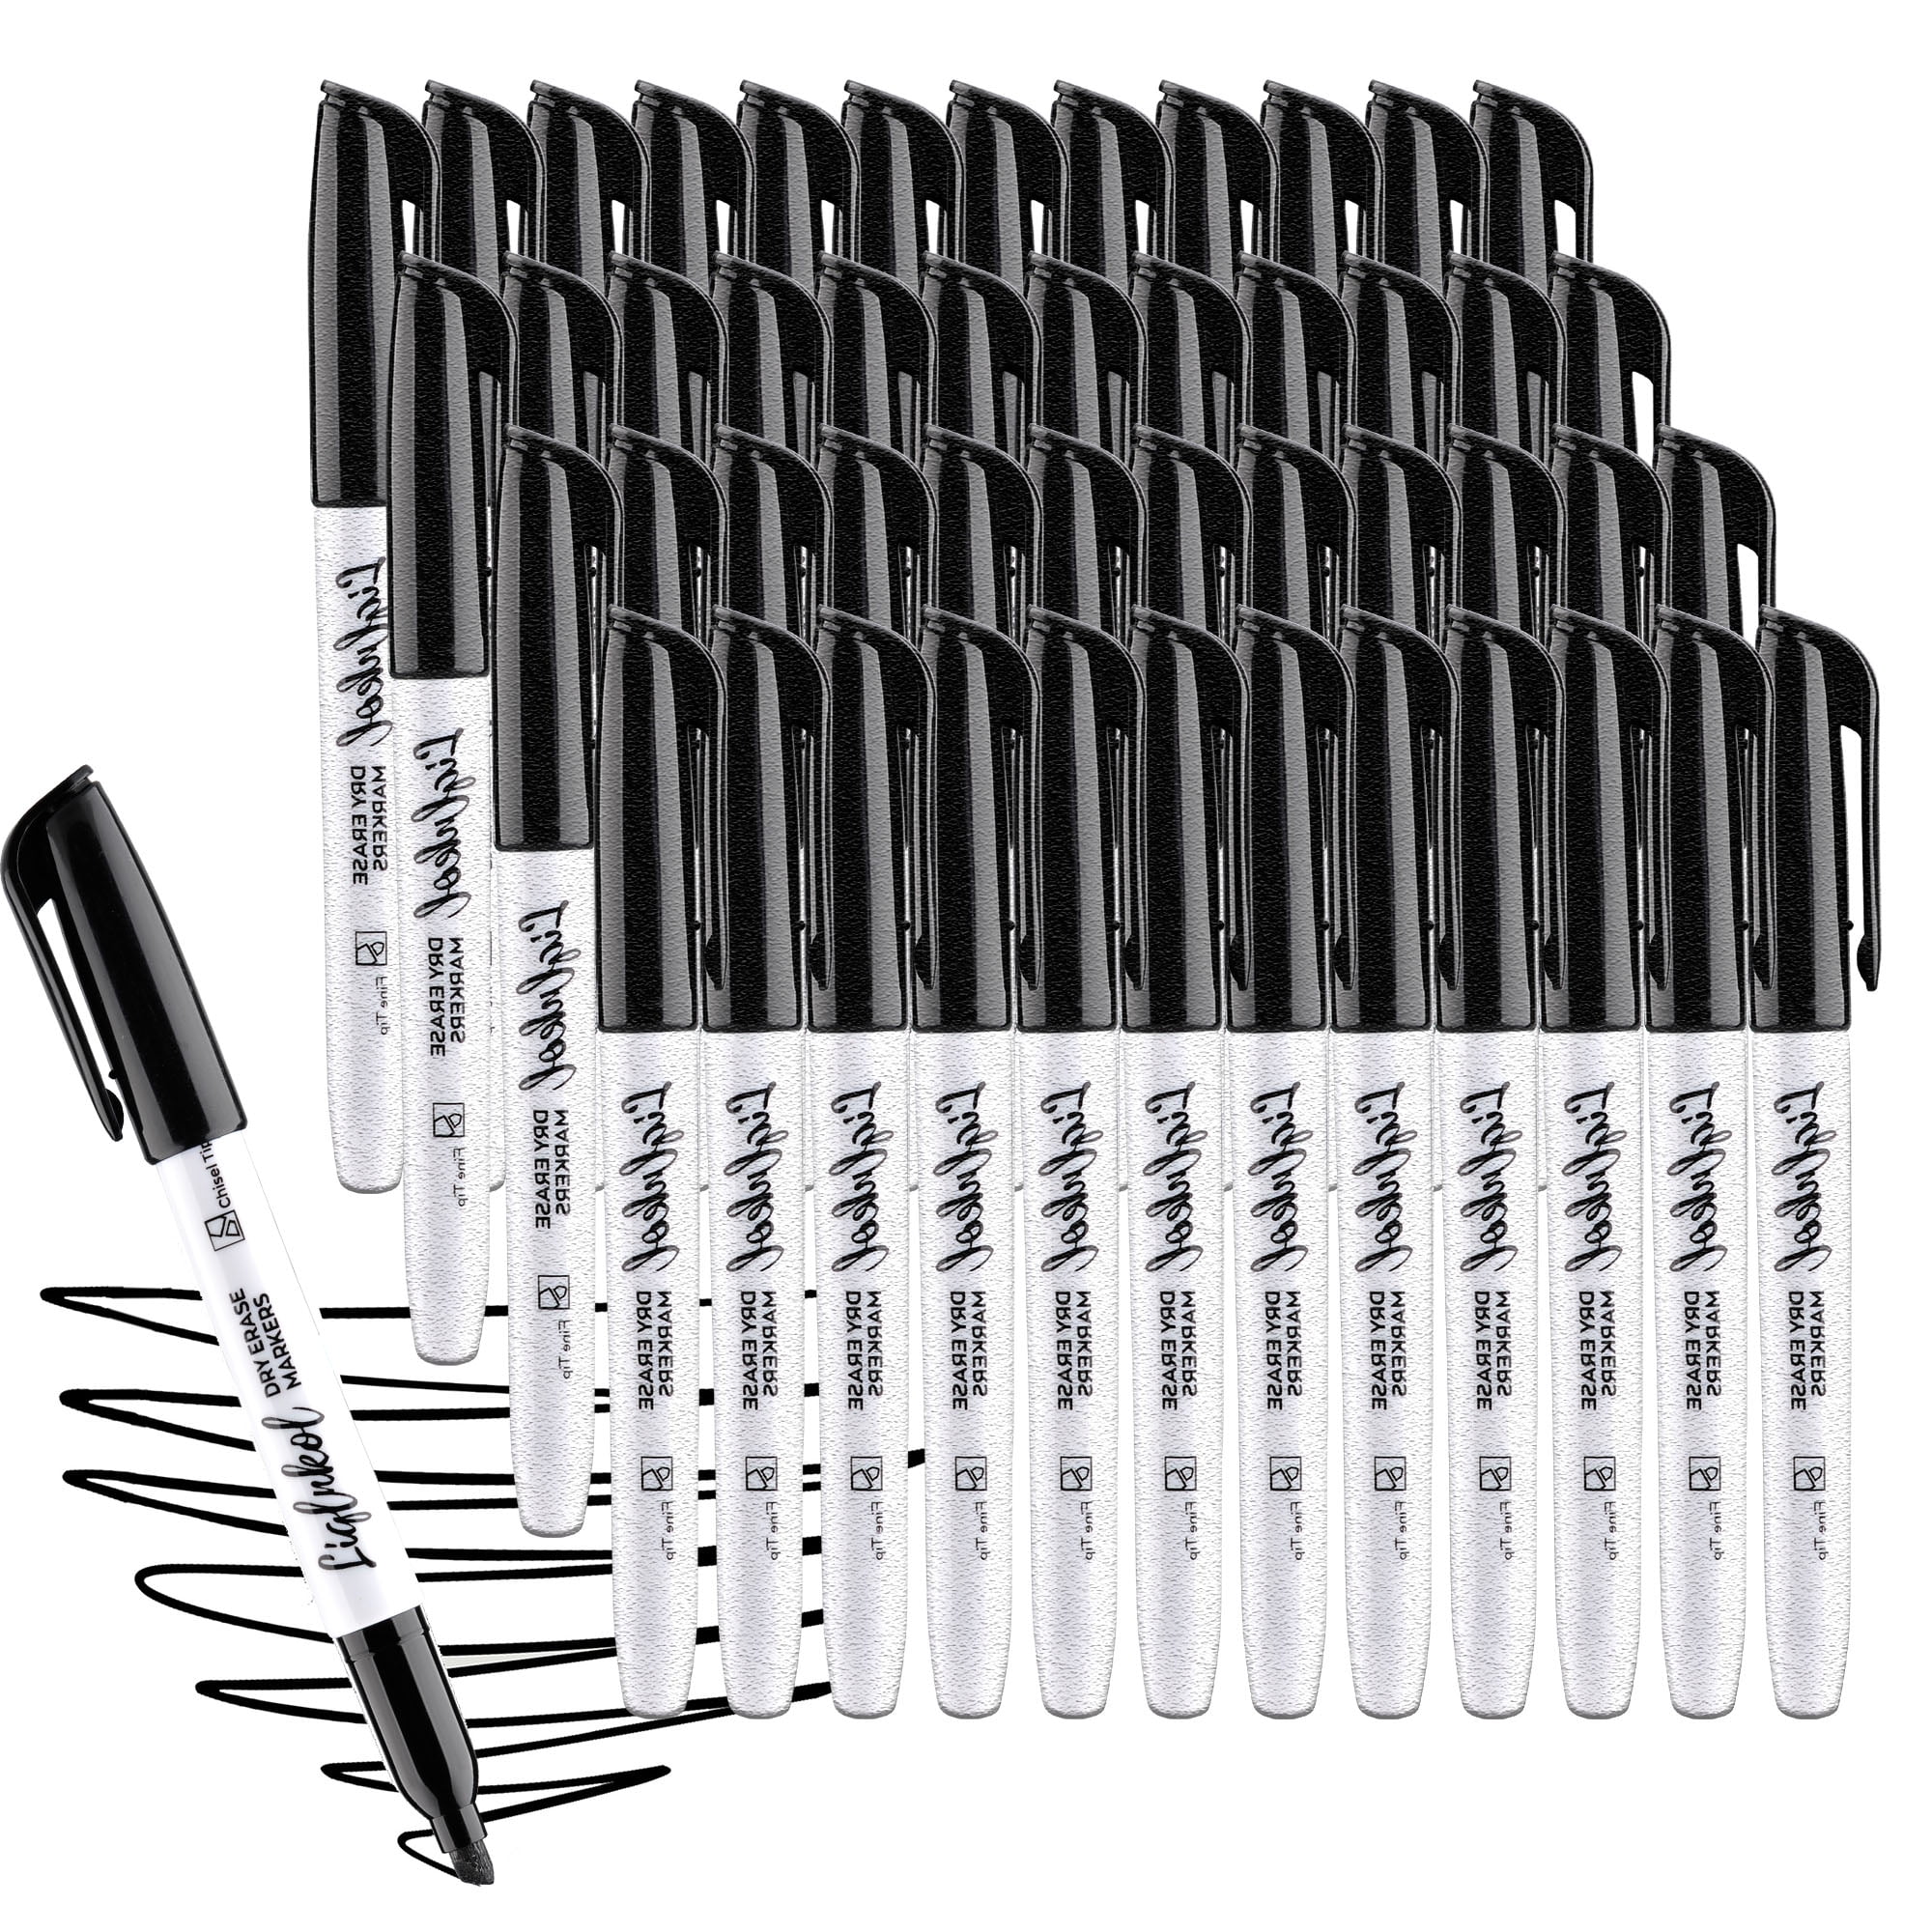 LiqInkol Dry Erase Markers Bulk Pack of 144 with 12 Vibrant Colors, Chisel  Tip White Board Markers Dry Erase Pens Whiteboard Markers for Kids, Home